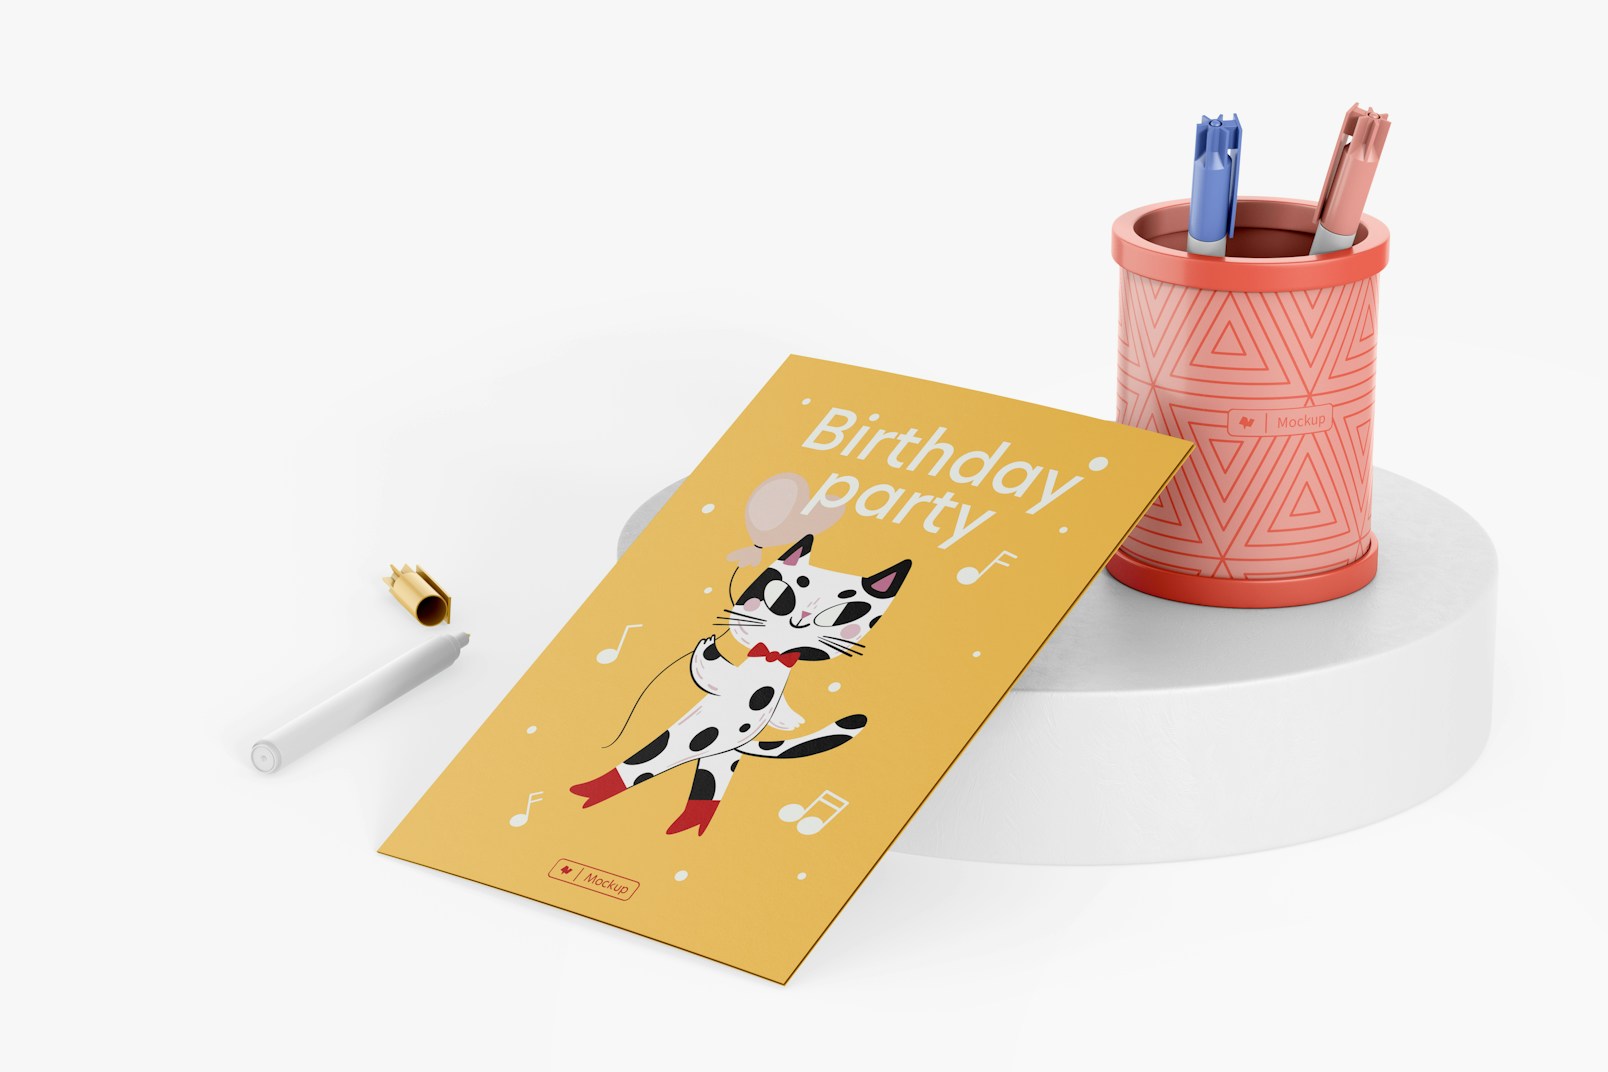 Round Pen Holder with Greeting Card Mockup, Perspective